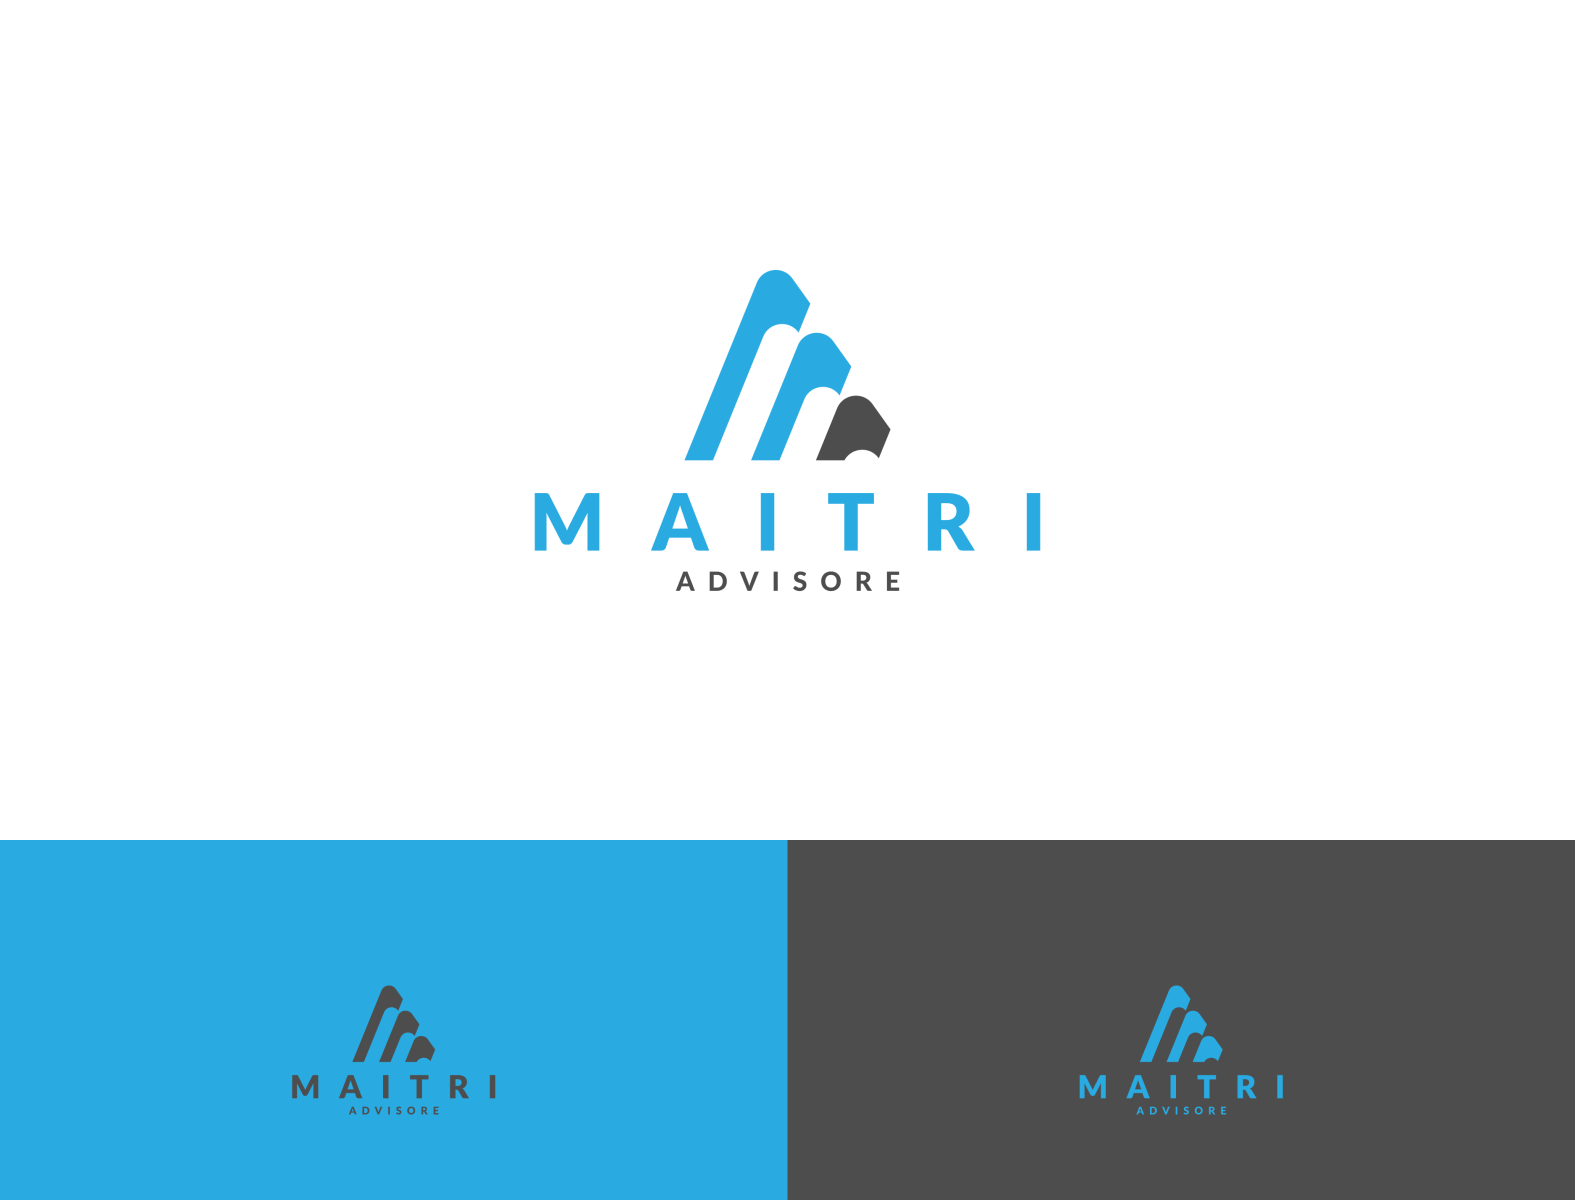 Maitri Projects :: Photos, videos, logos, illustrations and branding ::  Behance